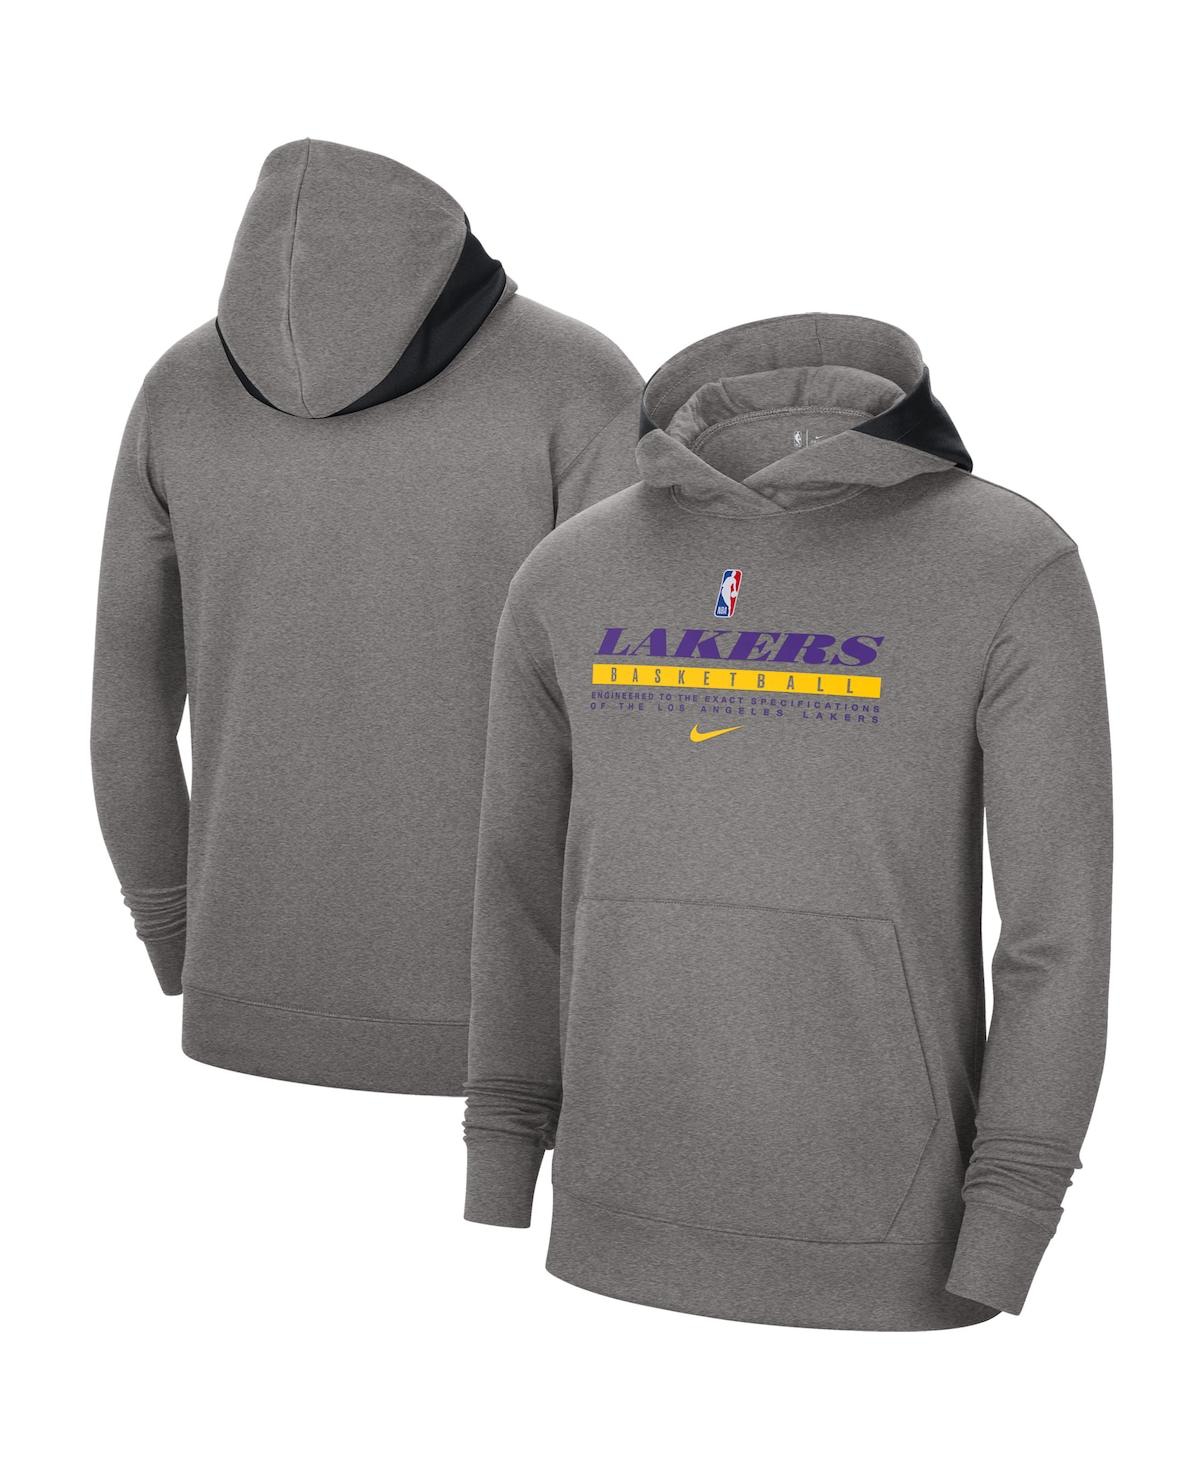 performance practice pullover